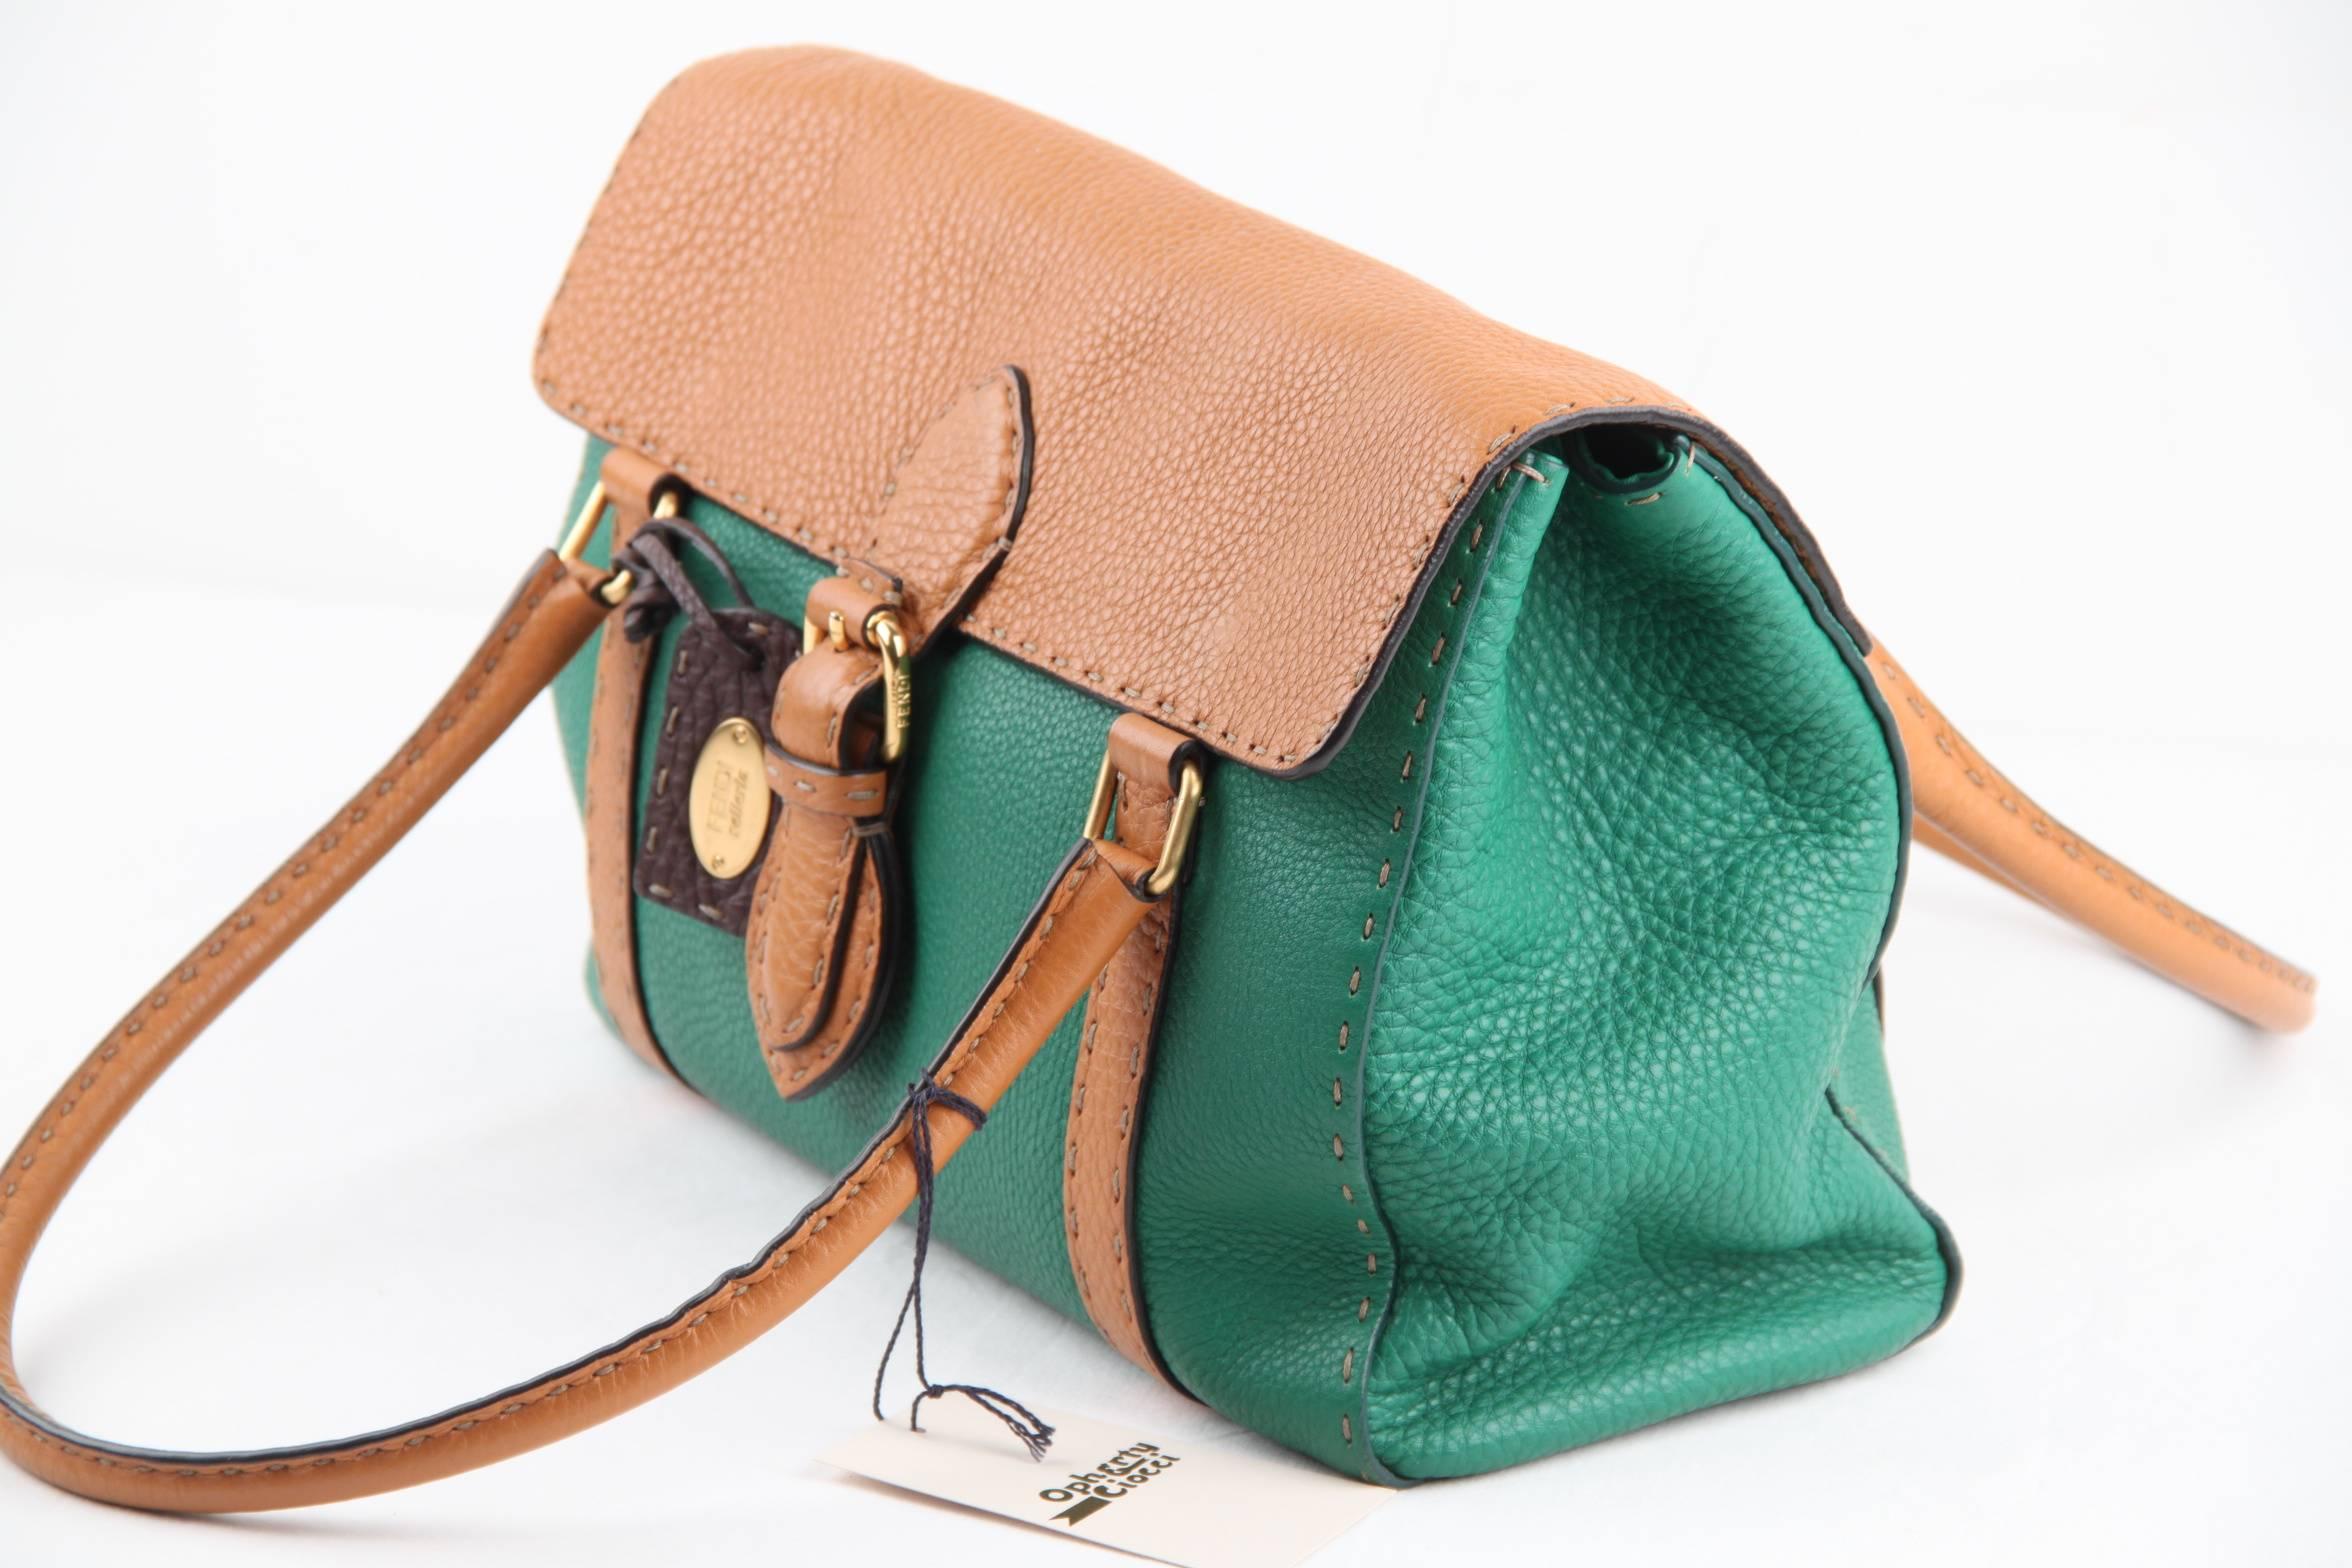  - Limited edition FENDI SELLERIA 'LINDA' bag - Medium size - handcrafted by FENDI master saddlers.

- Bicolor design (Tan & Green) with contrasting stitchings

- Supple grained leather with rolled top handles

- Hanging dark brown leather